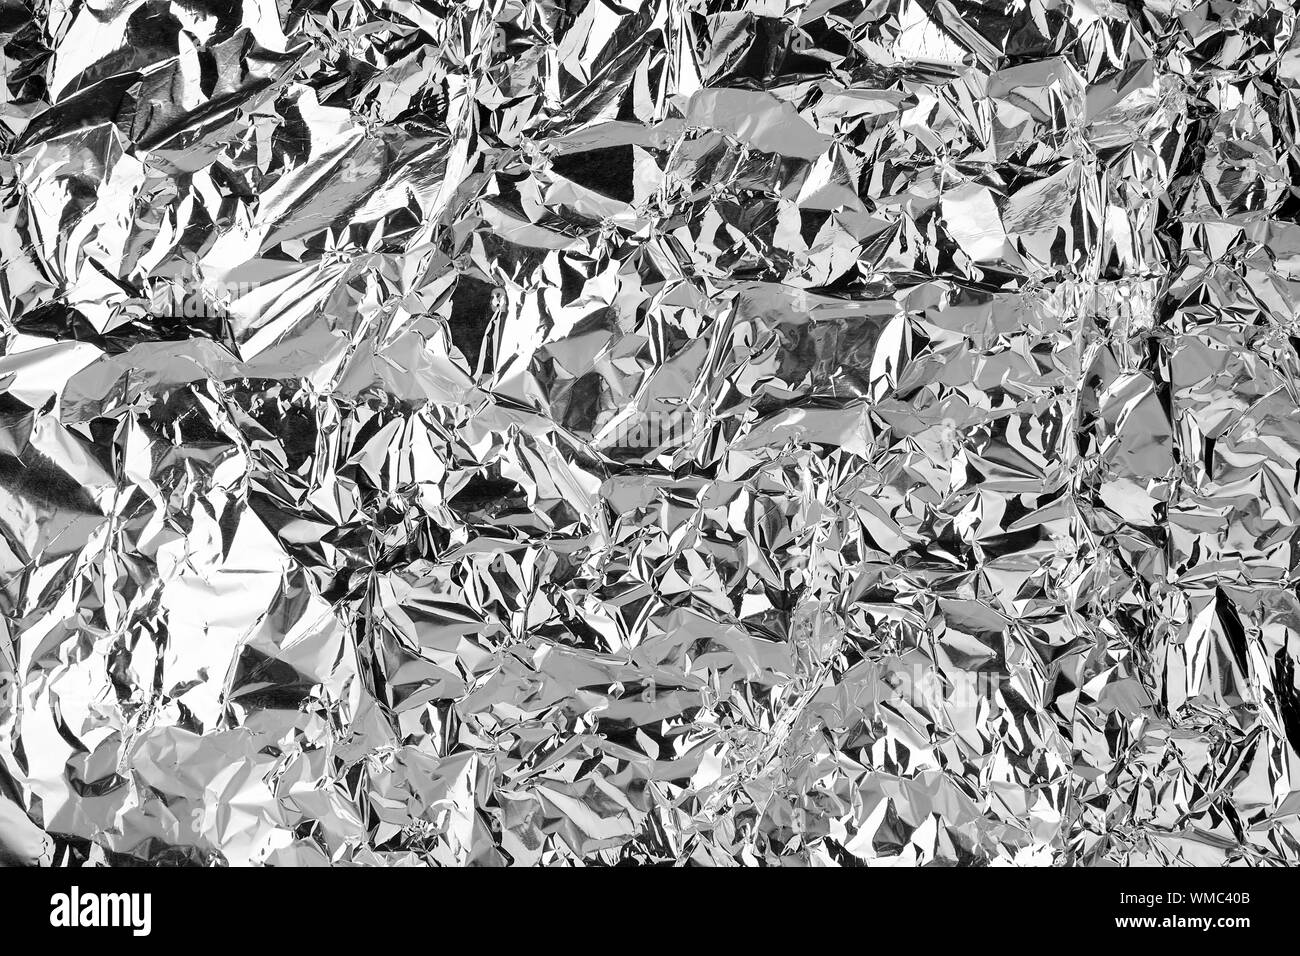 Crumpled silver foil shining texture background, bright shiny festive design, metallic glitter surface, holiday decoration backdrop concept, metal Stock Photo